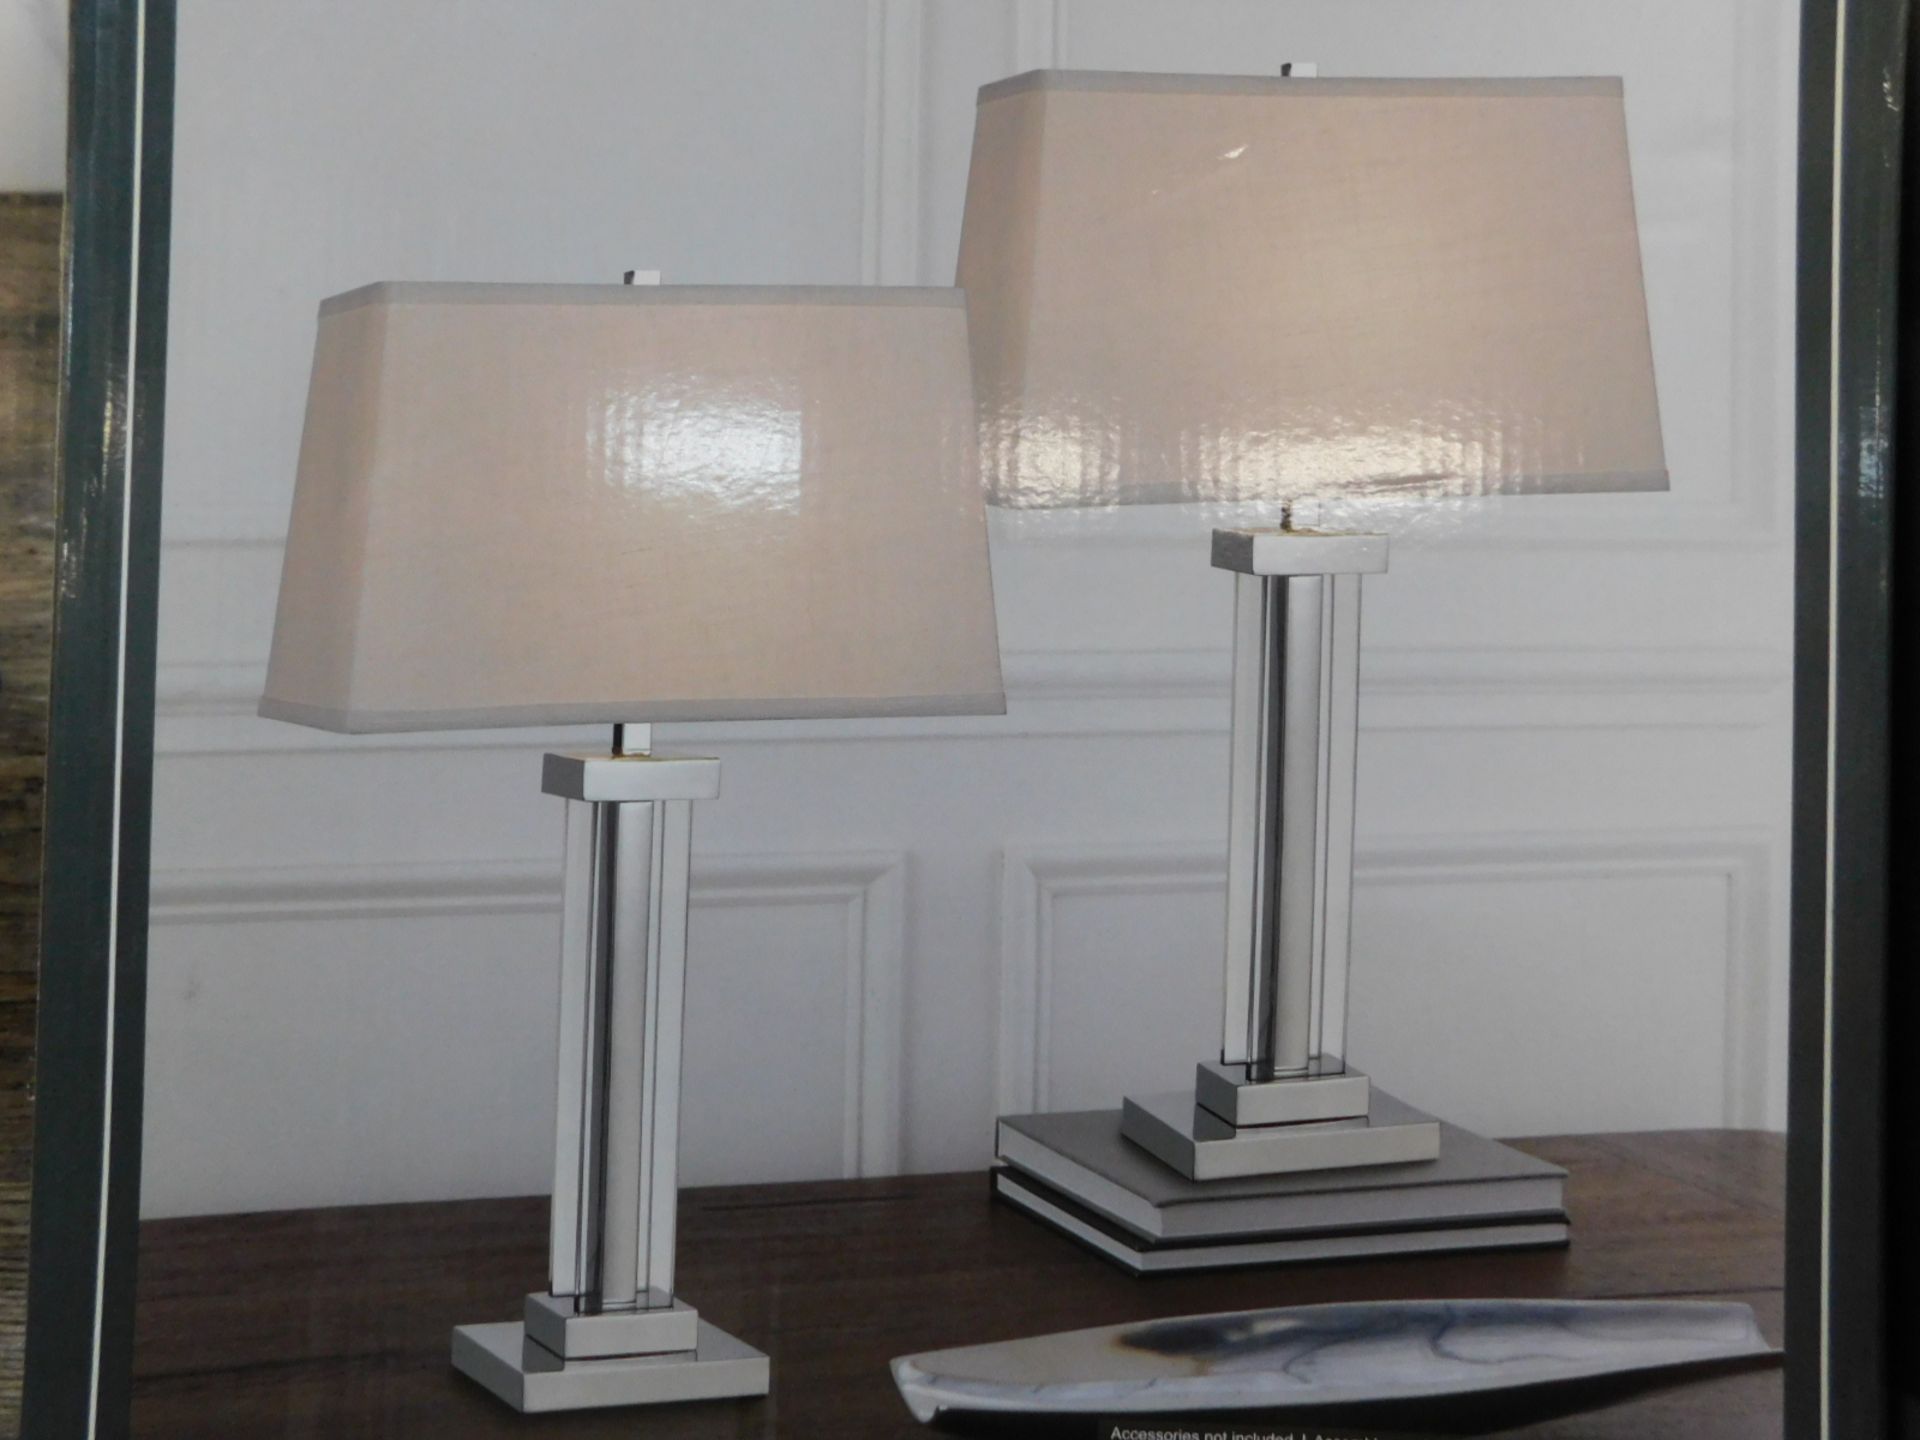 1 BOXED PAIR OF KATE CRYSTAL TABLE LAMPS RRP Â£79